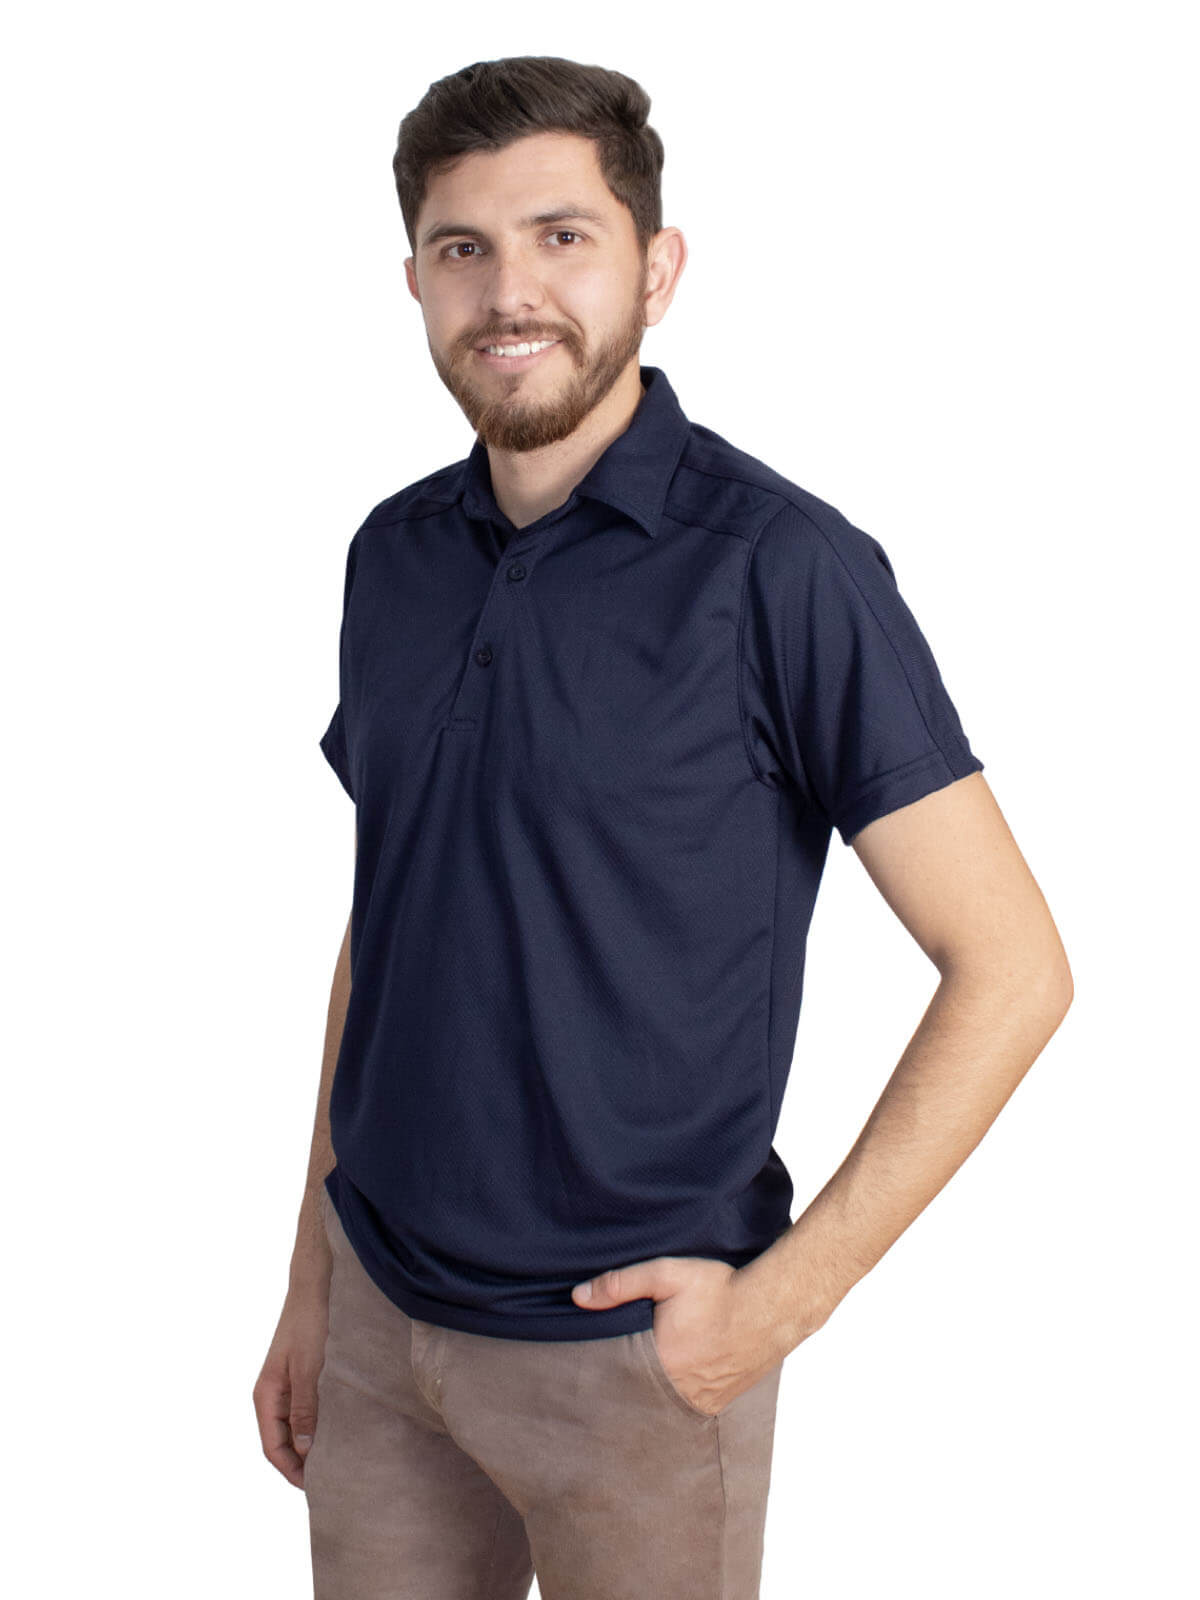 Golf Dry Fit polo navy